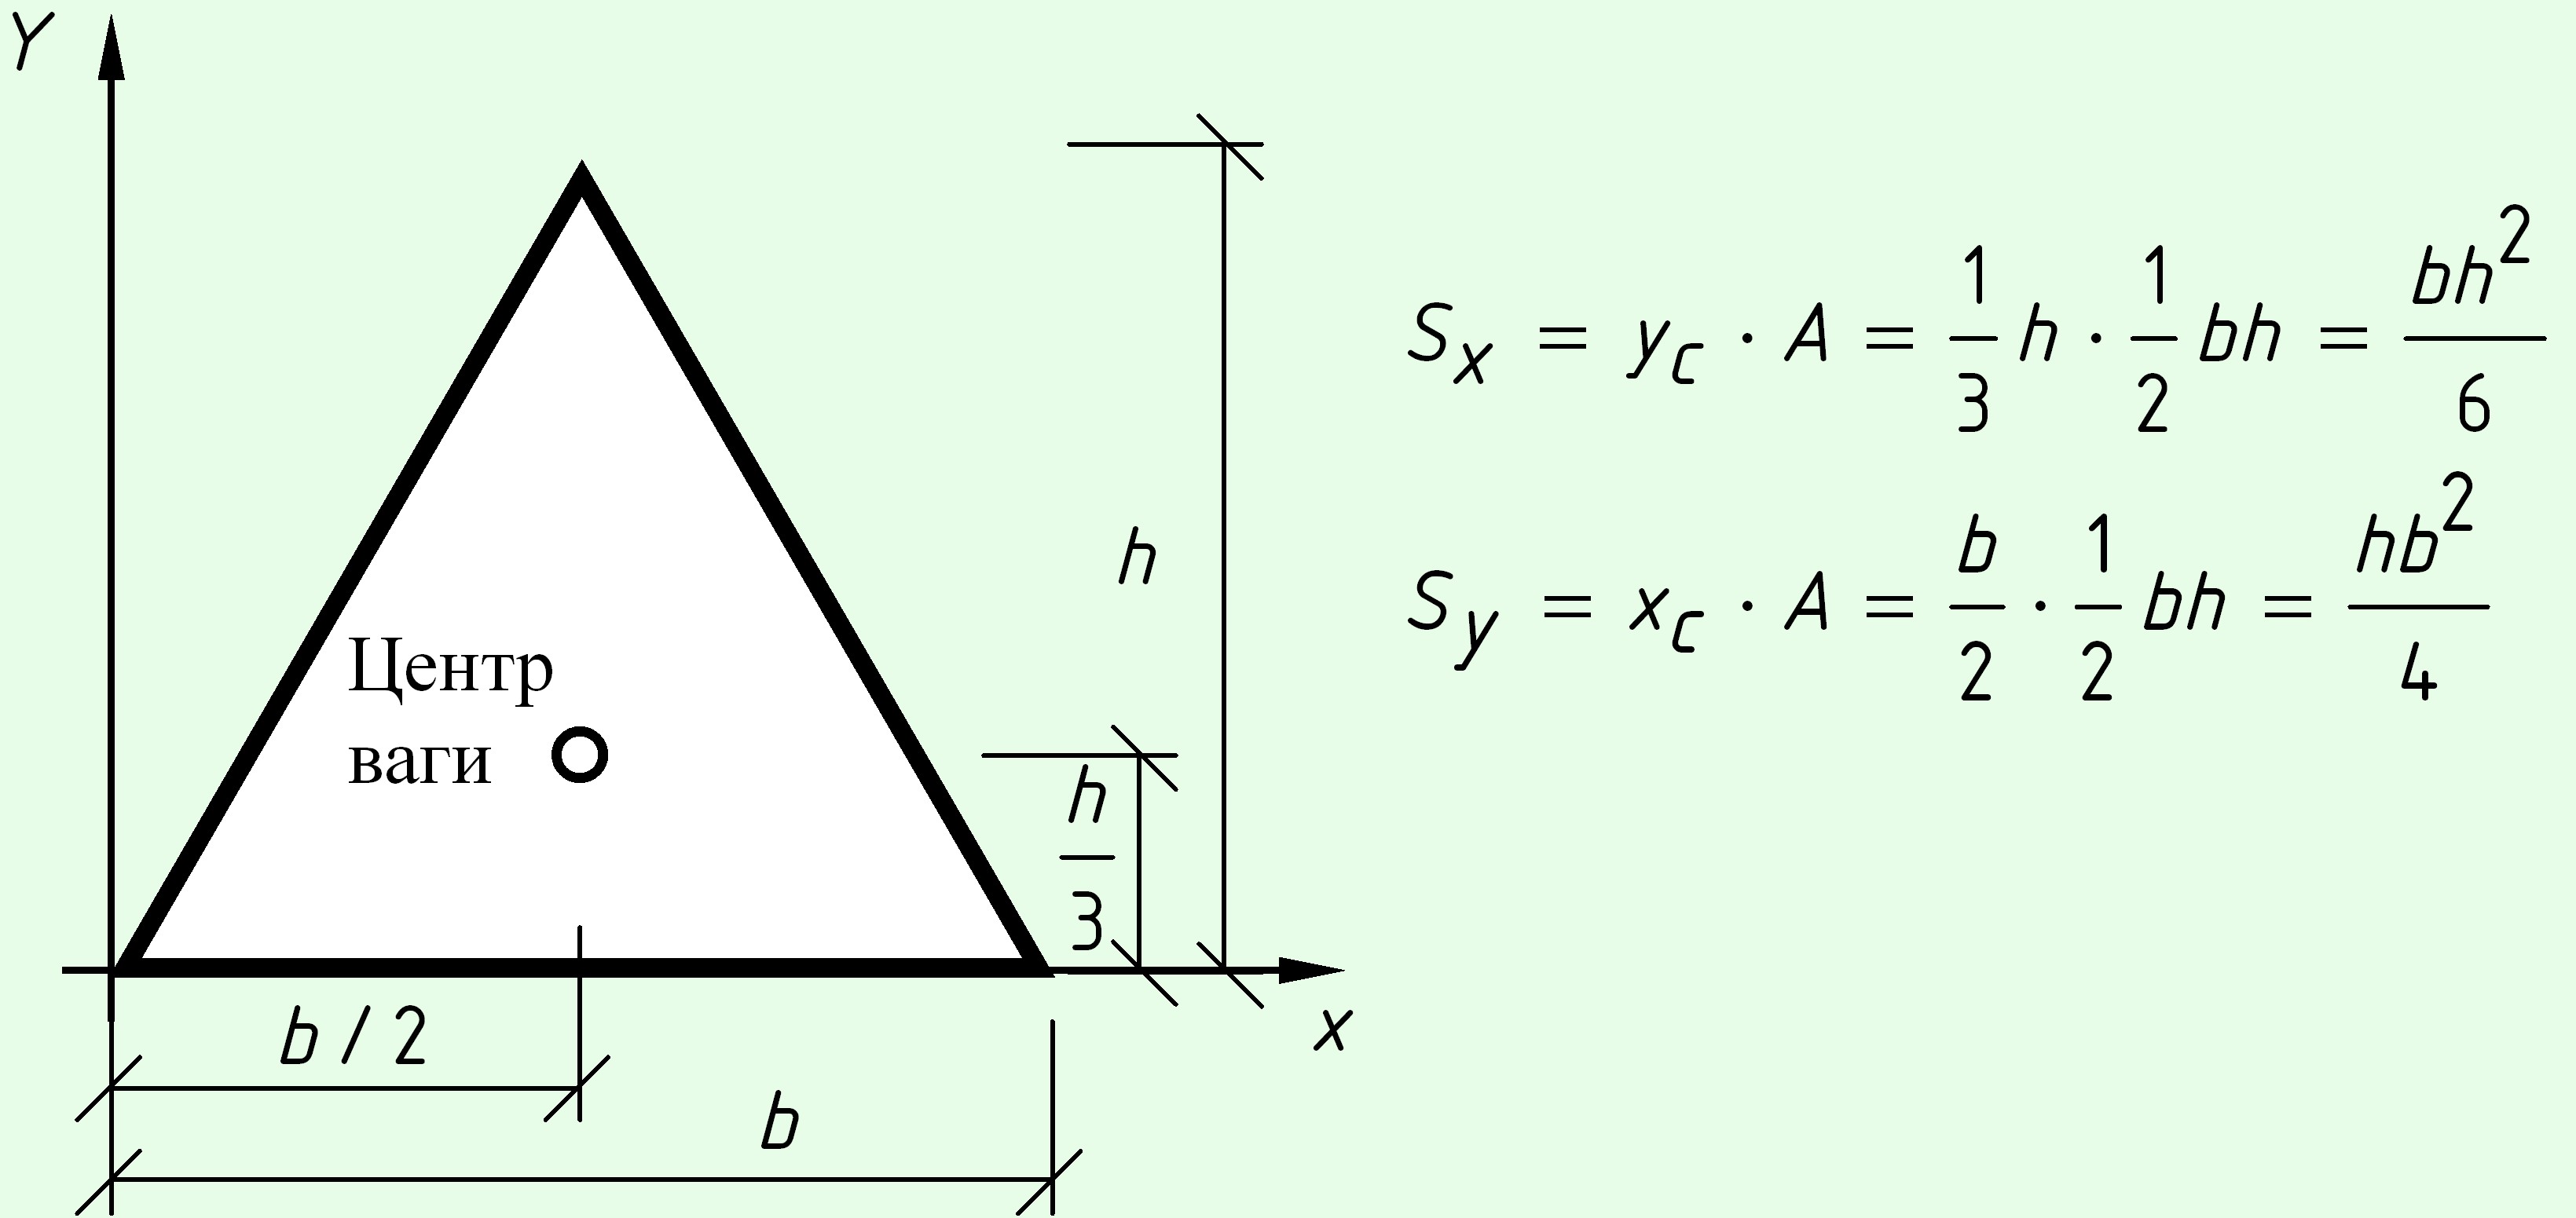 Center of gravity formula for triangle